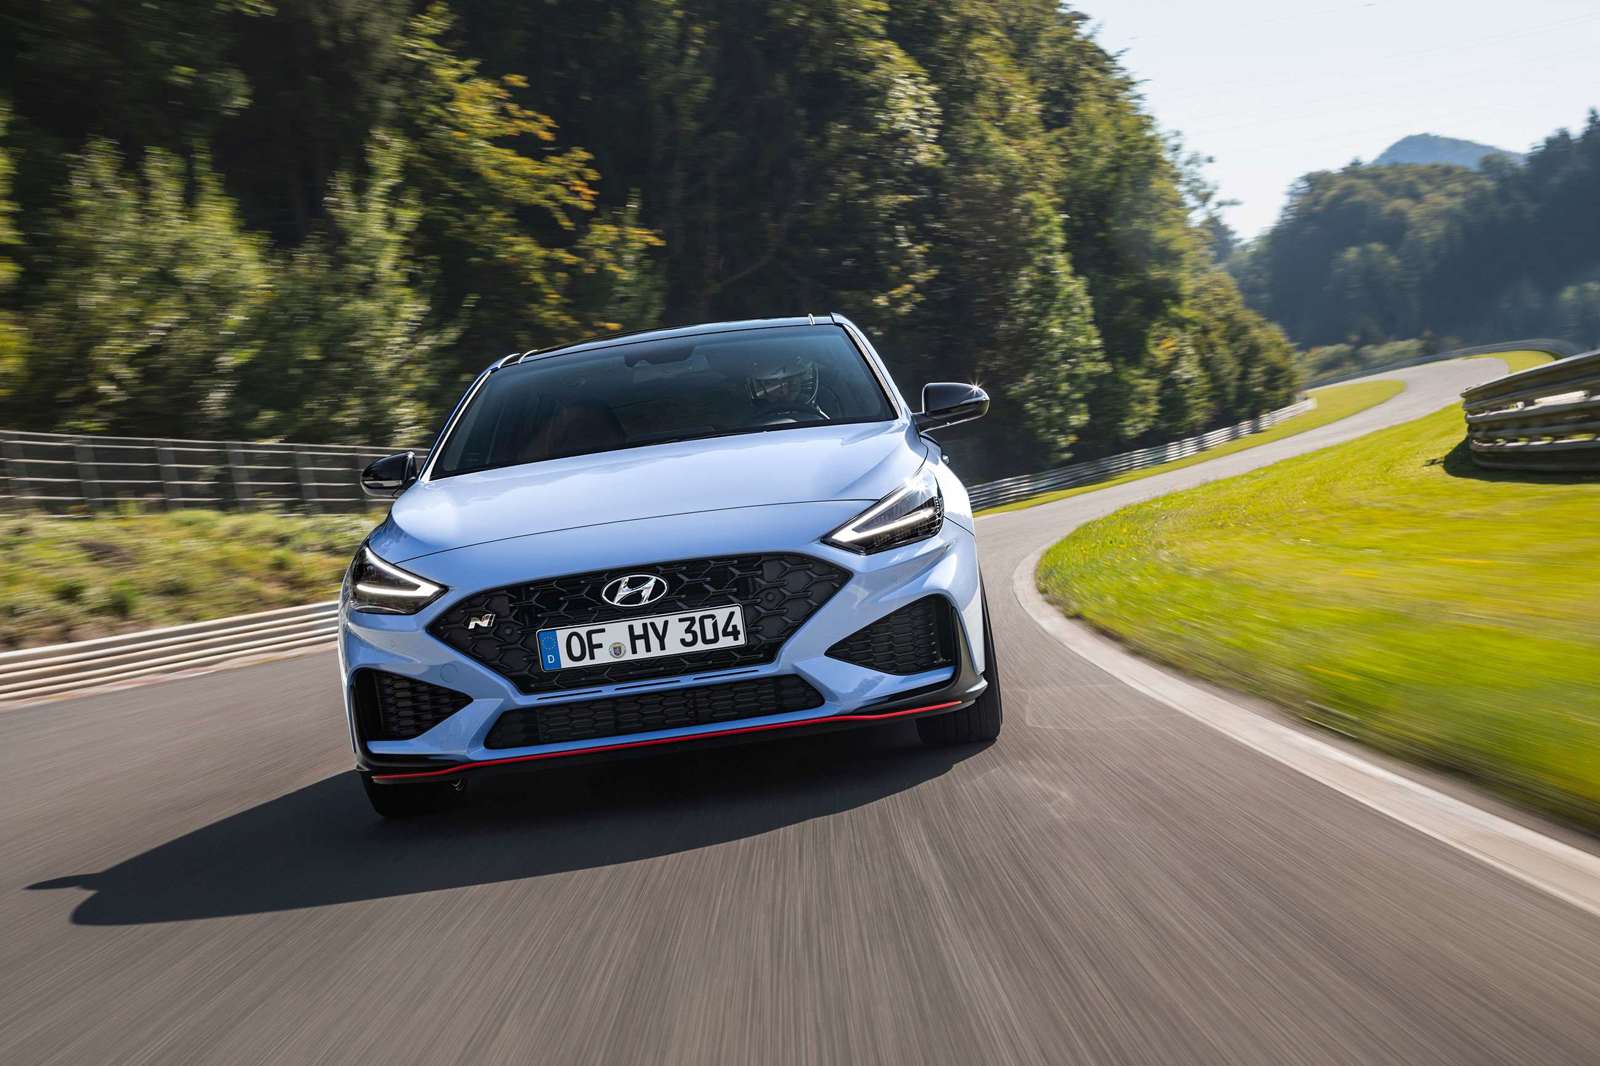 The new Hyundai i30 N looks sharper and shifts quicker